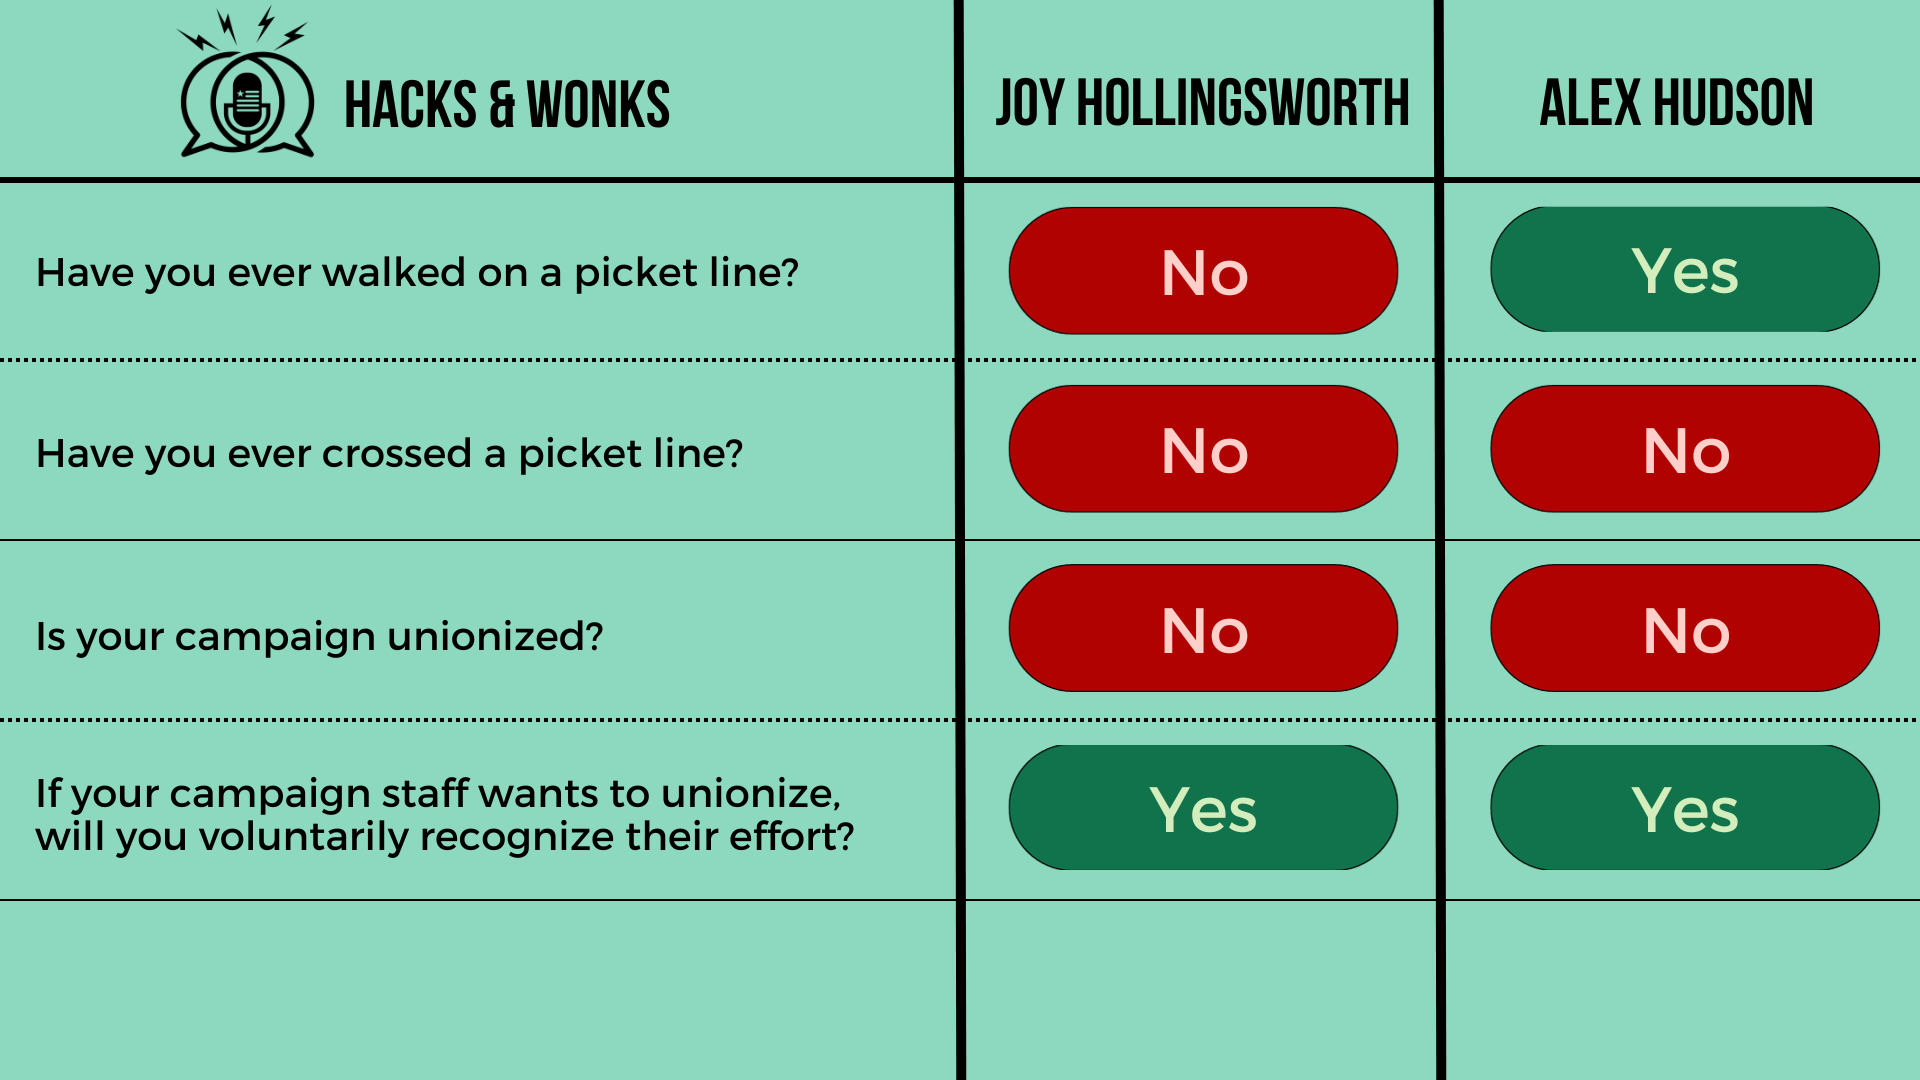 Q: Have you ever walked on a picket line? Joy Hollingsworth: No, Alex Hudson: Yes  Q: Have you ever crossed a picket line? Joy Hollingsworth: No, Alex Hudson: No  Q: Is your campaign unionized? Joy Hollingsworth: No, Alex Hudson: No  Q: If your campa